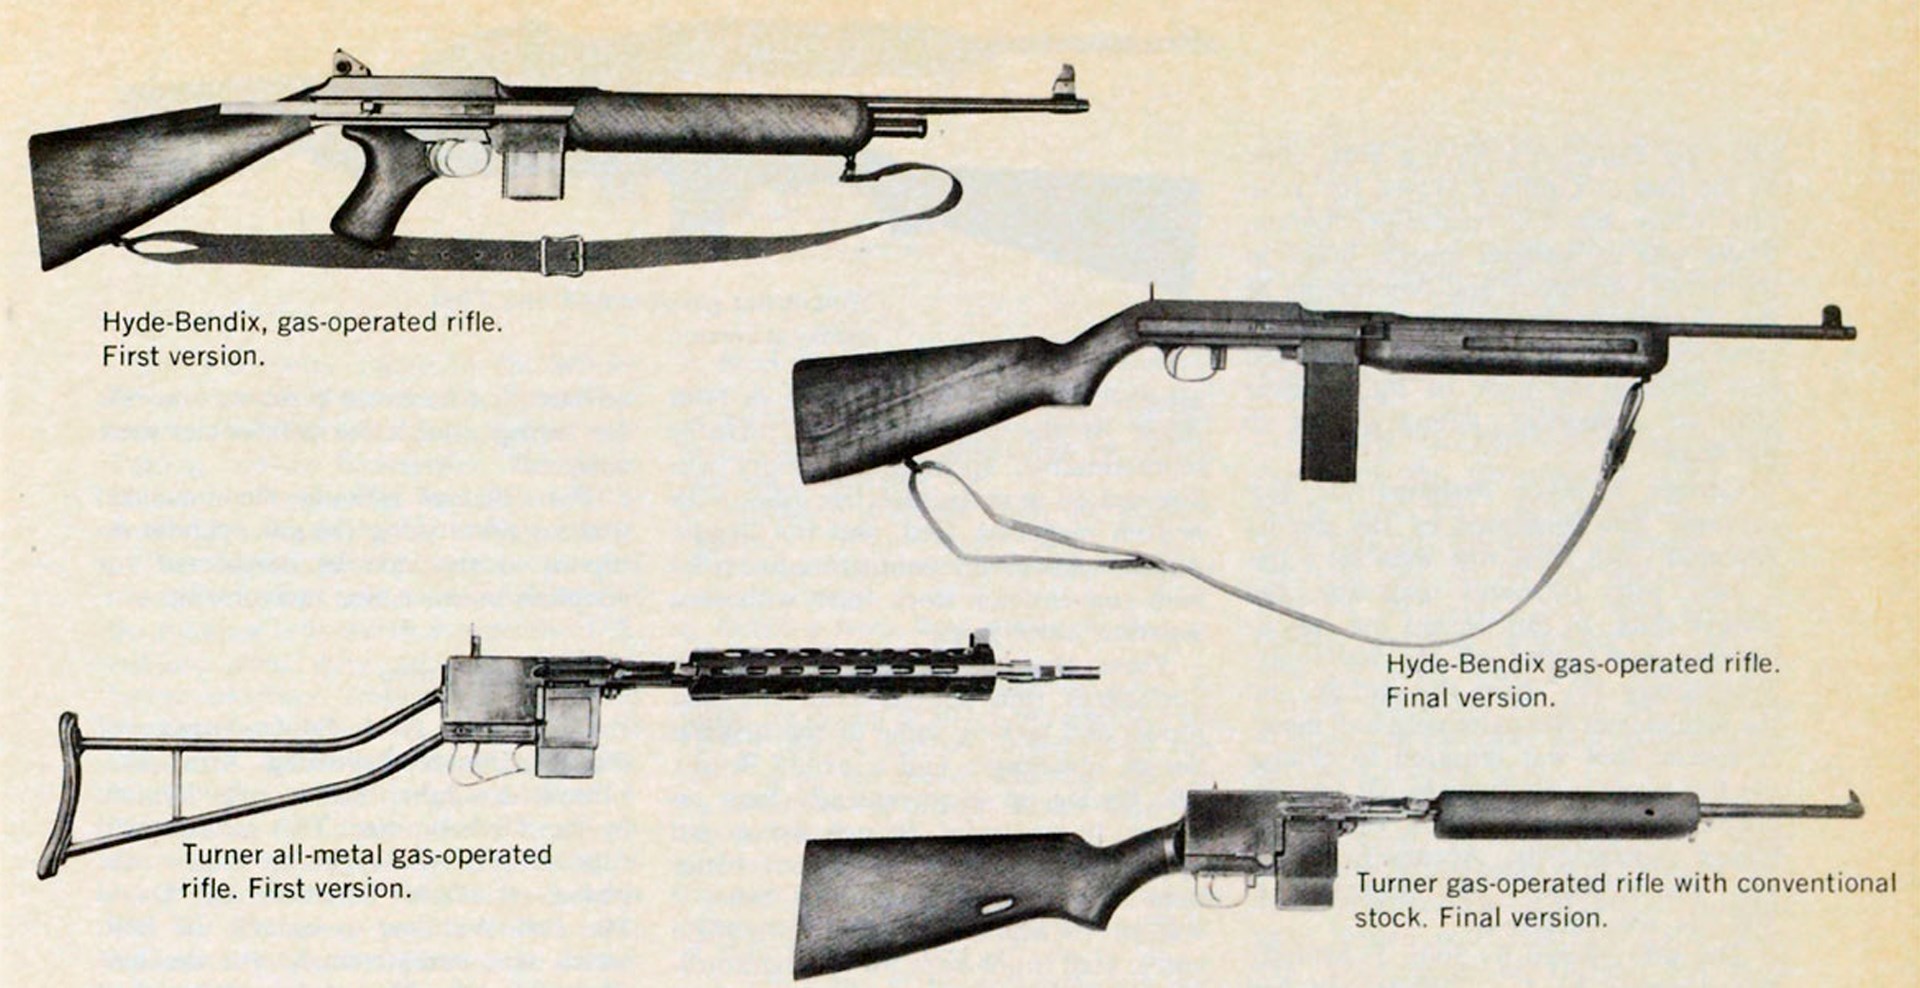 Right-side view smg submachine guns carbines text on image